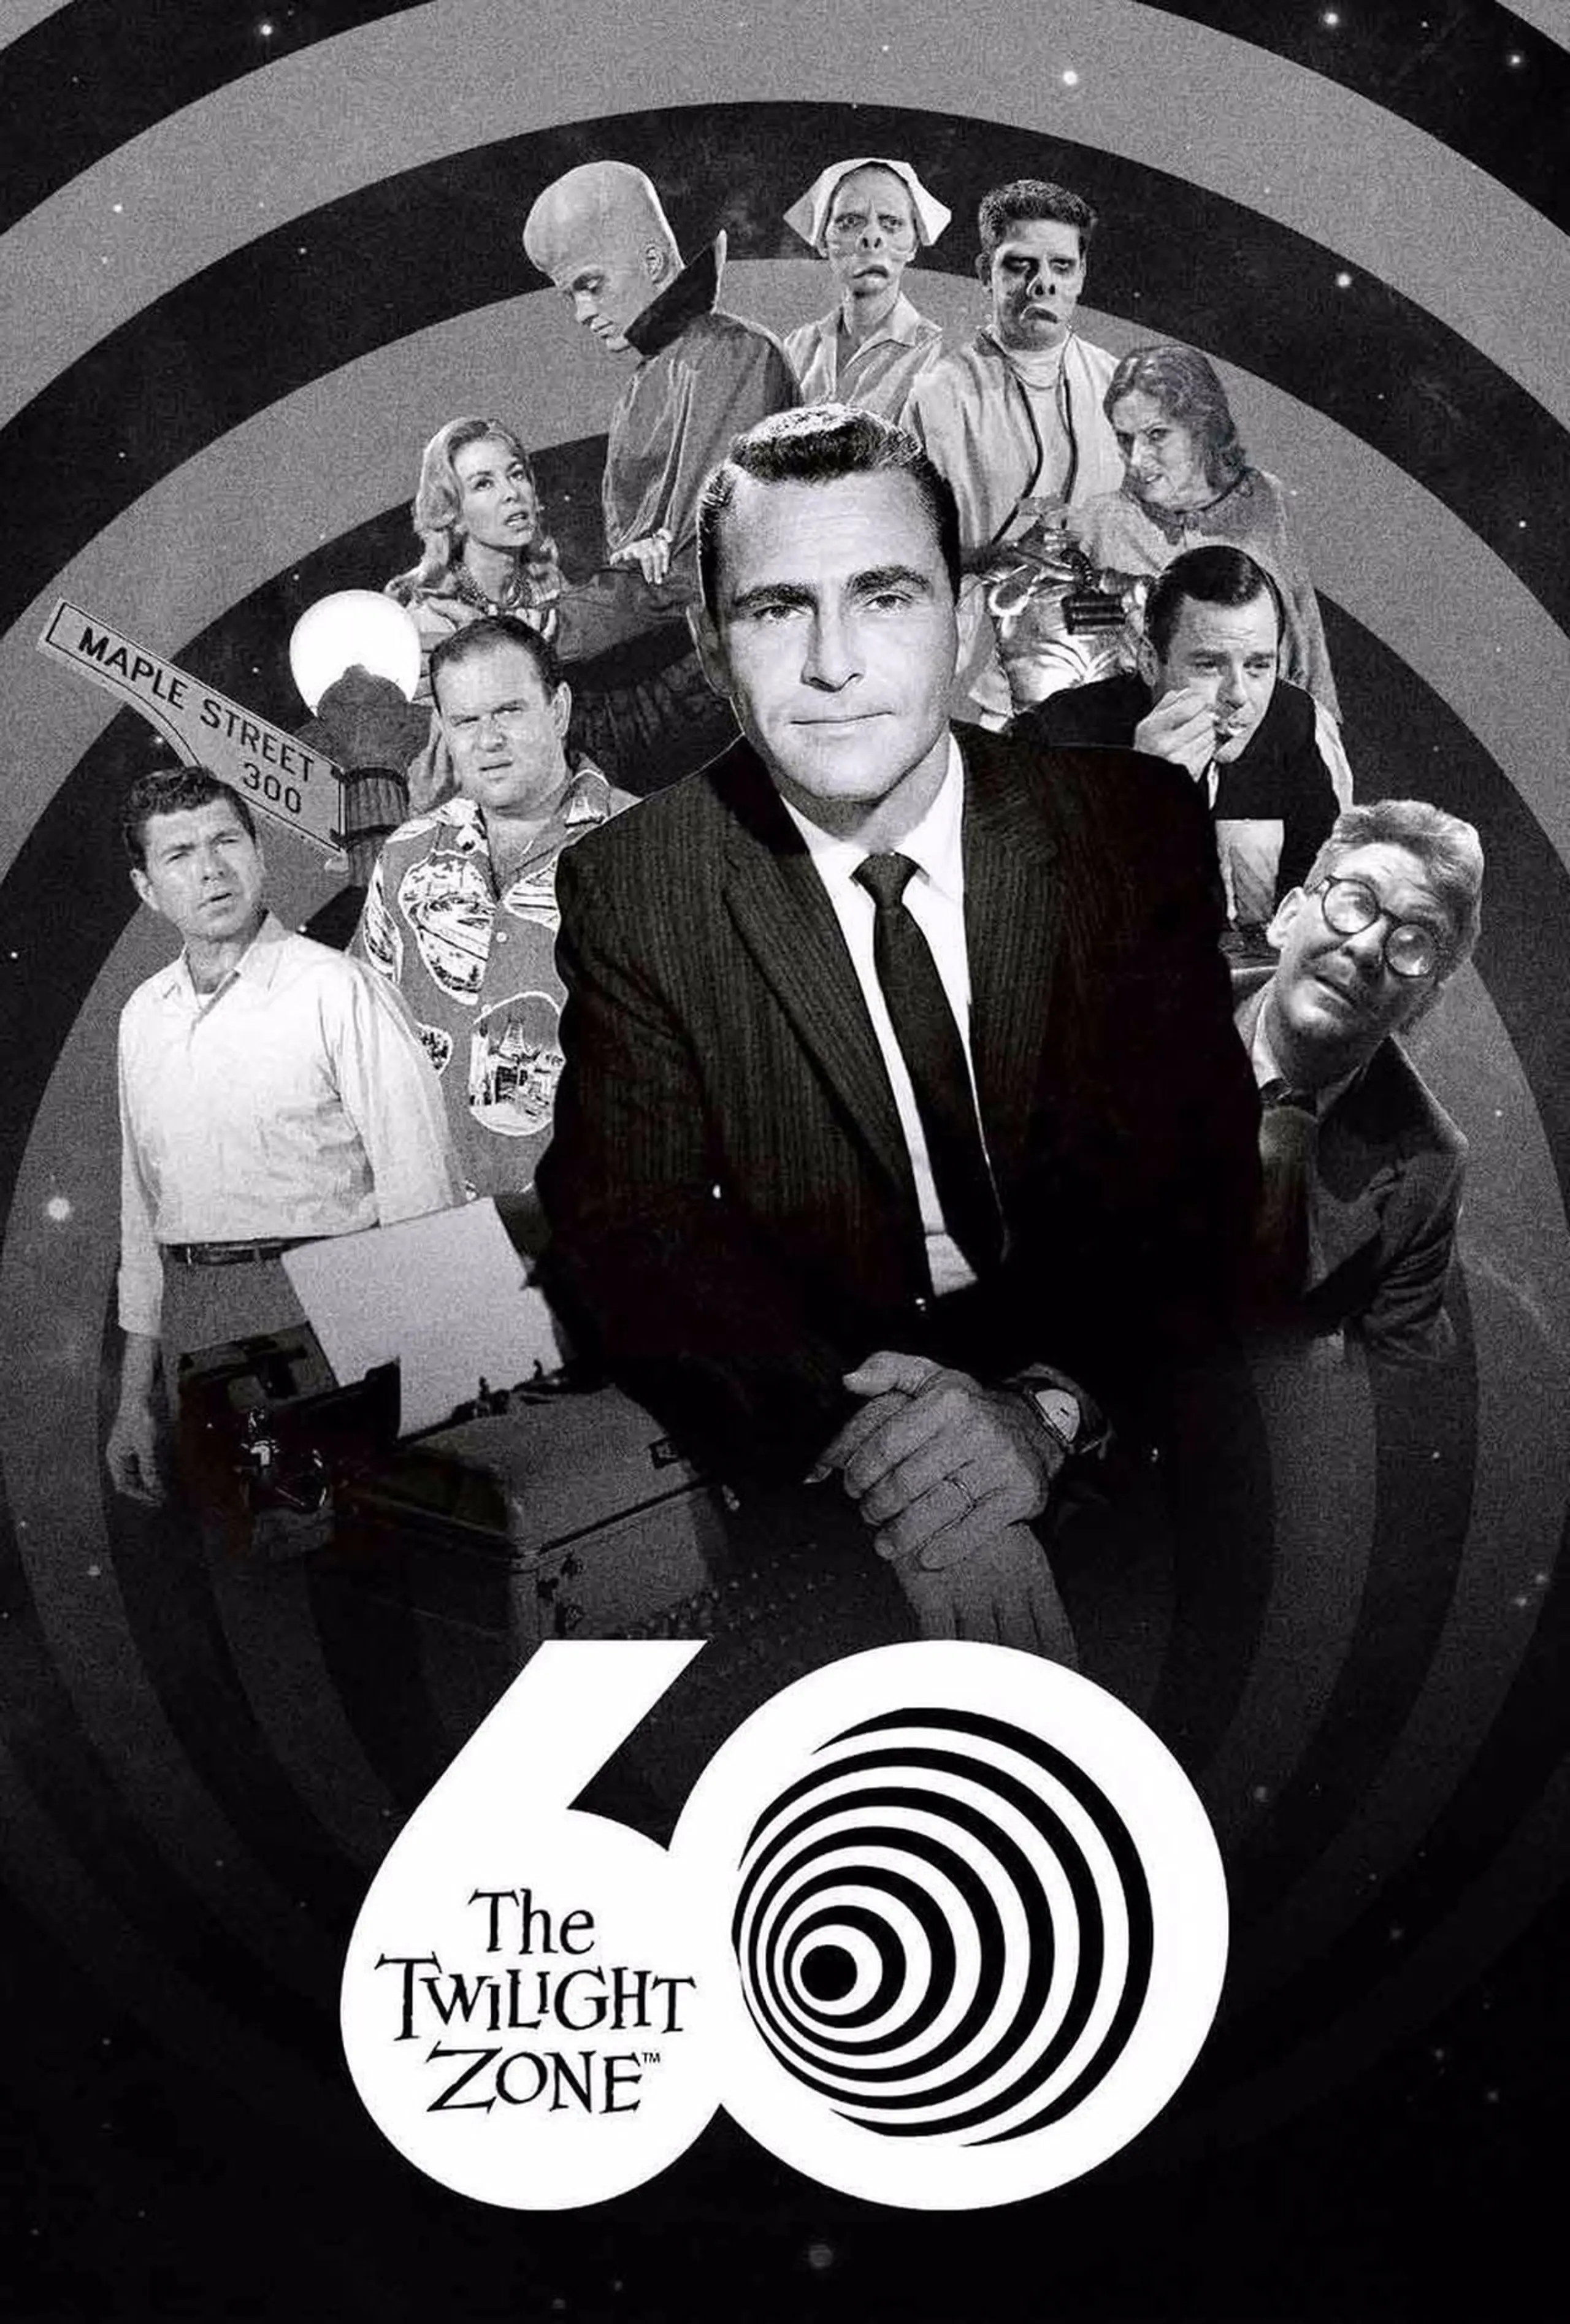 The Twilight Zone 60th: Remembering Rod Serling